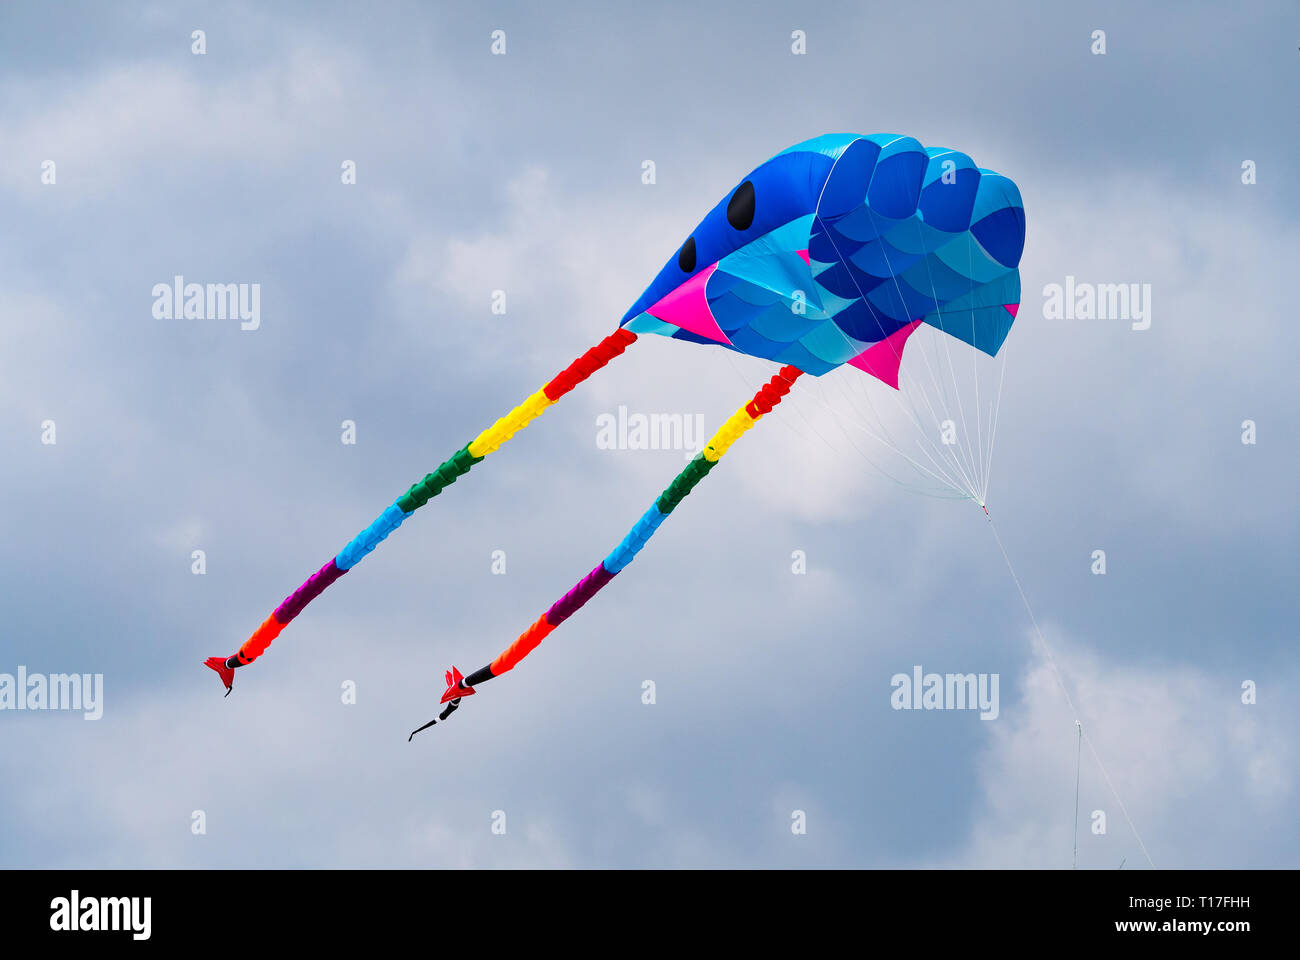 Colourful soft kite flying with a cloudy sky background. Stock Photo